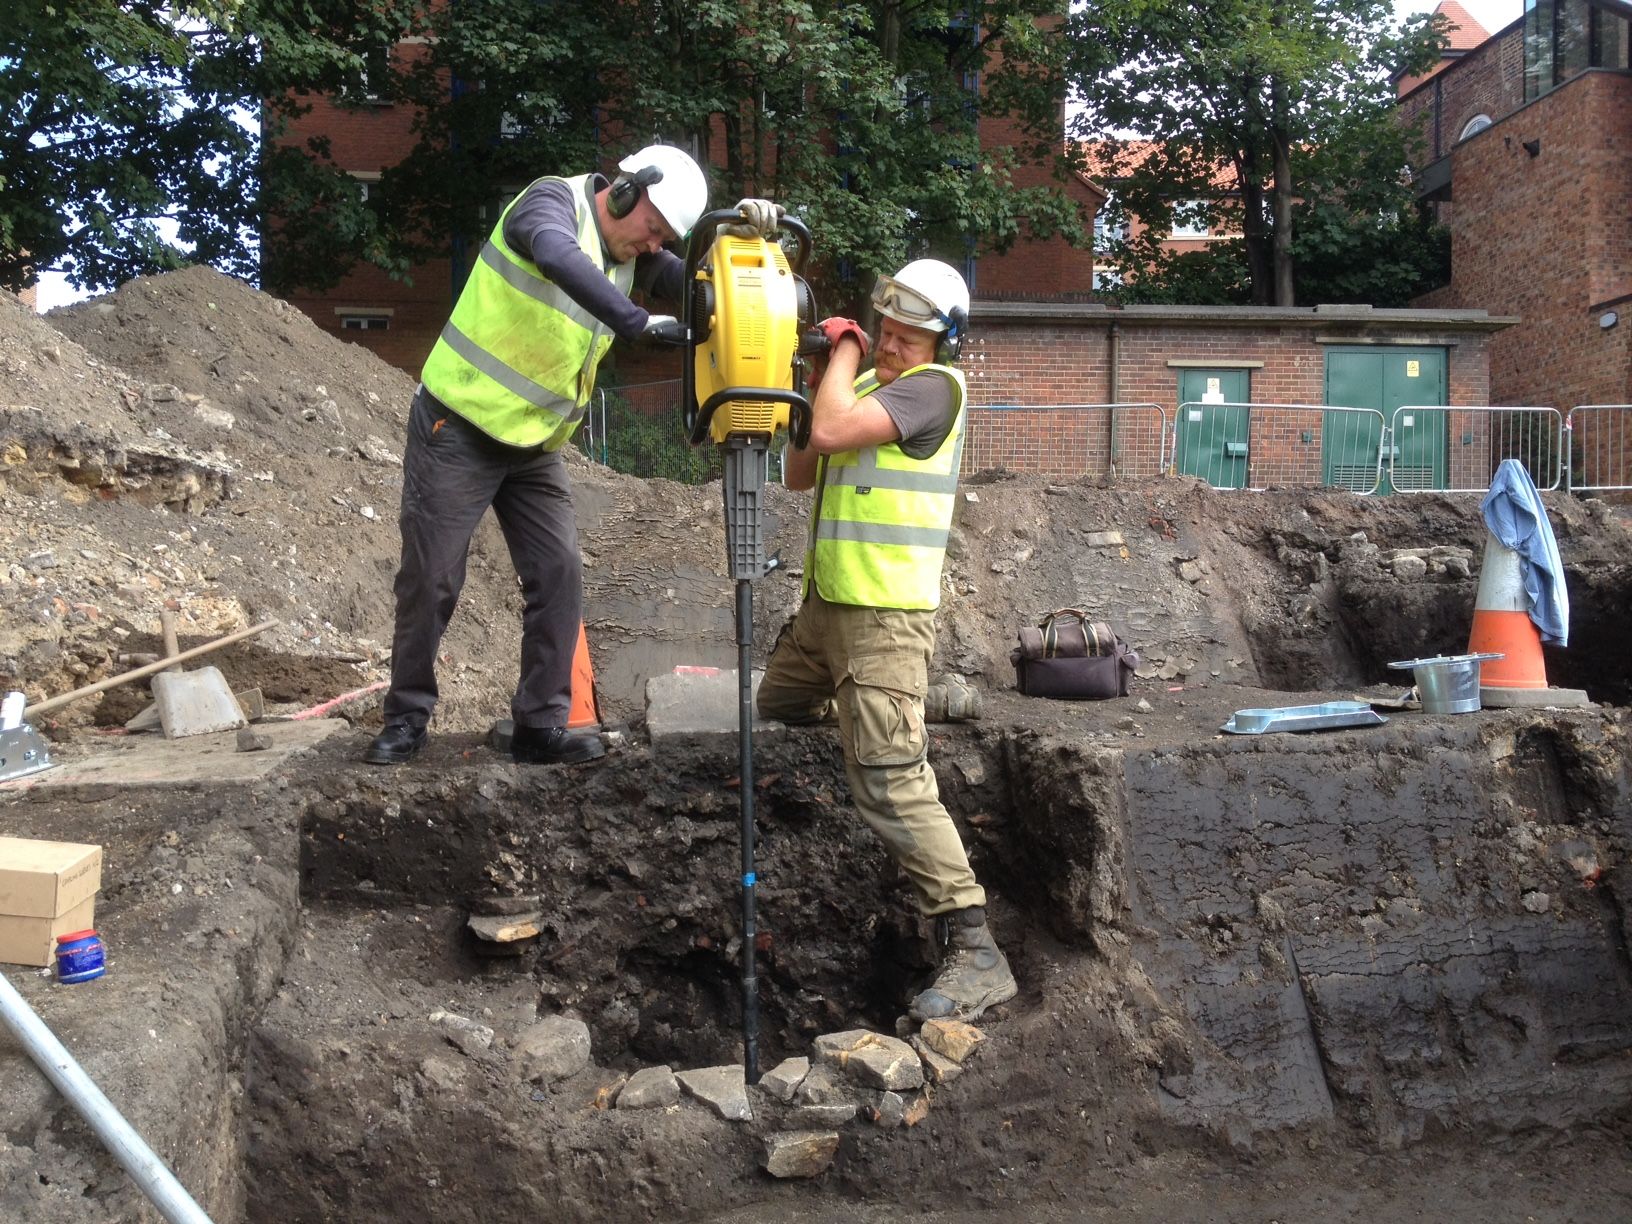 Two archaeologists using a handheld concussion borer to drill for palaeoenvironmental cores